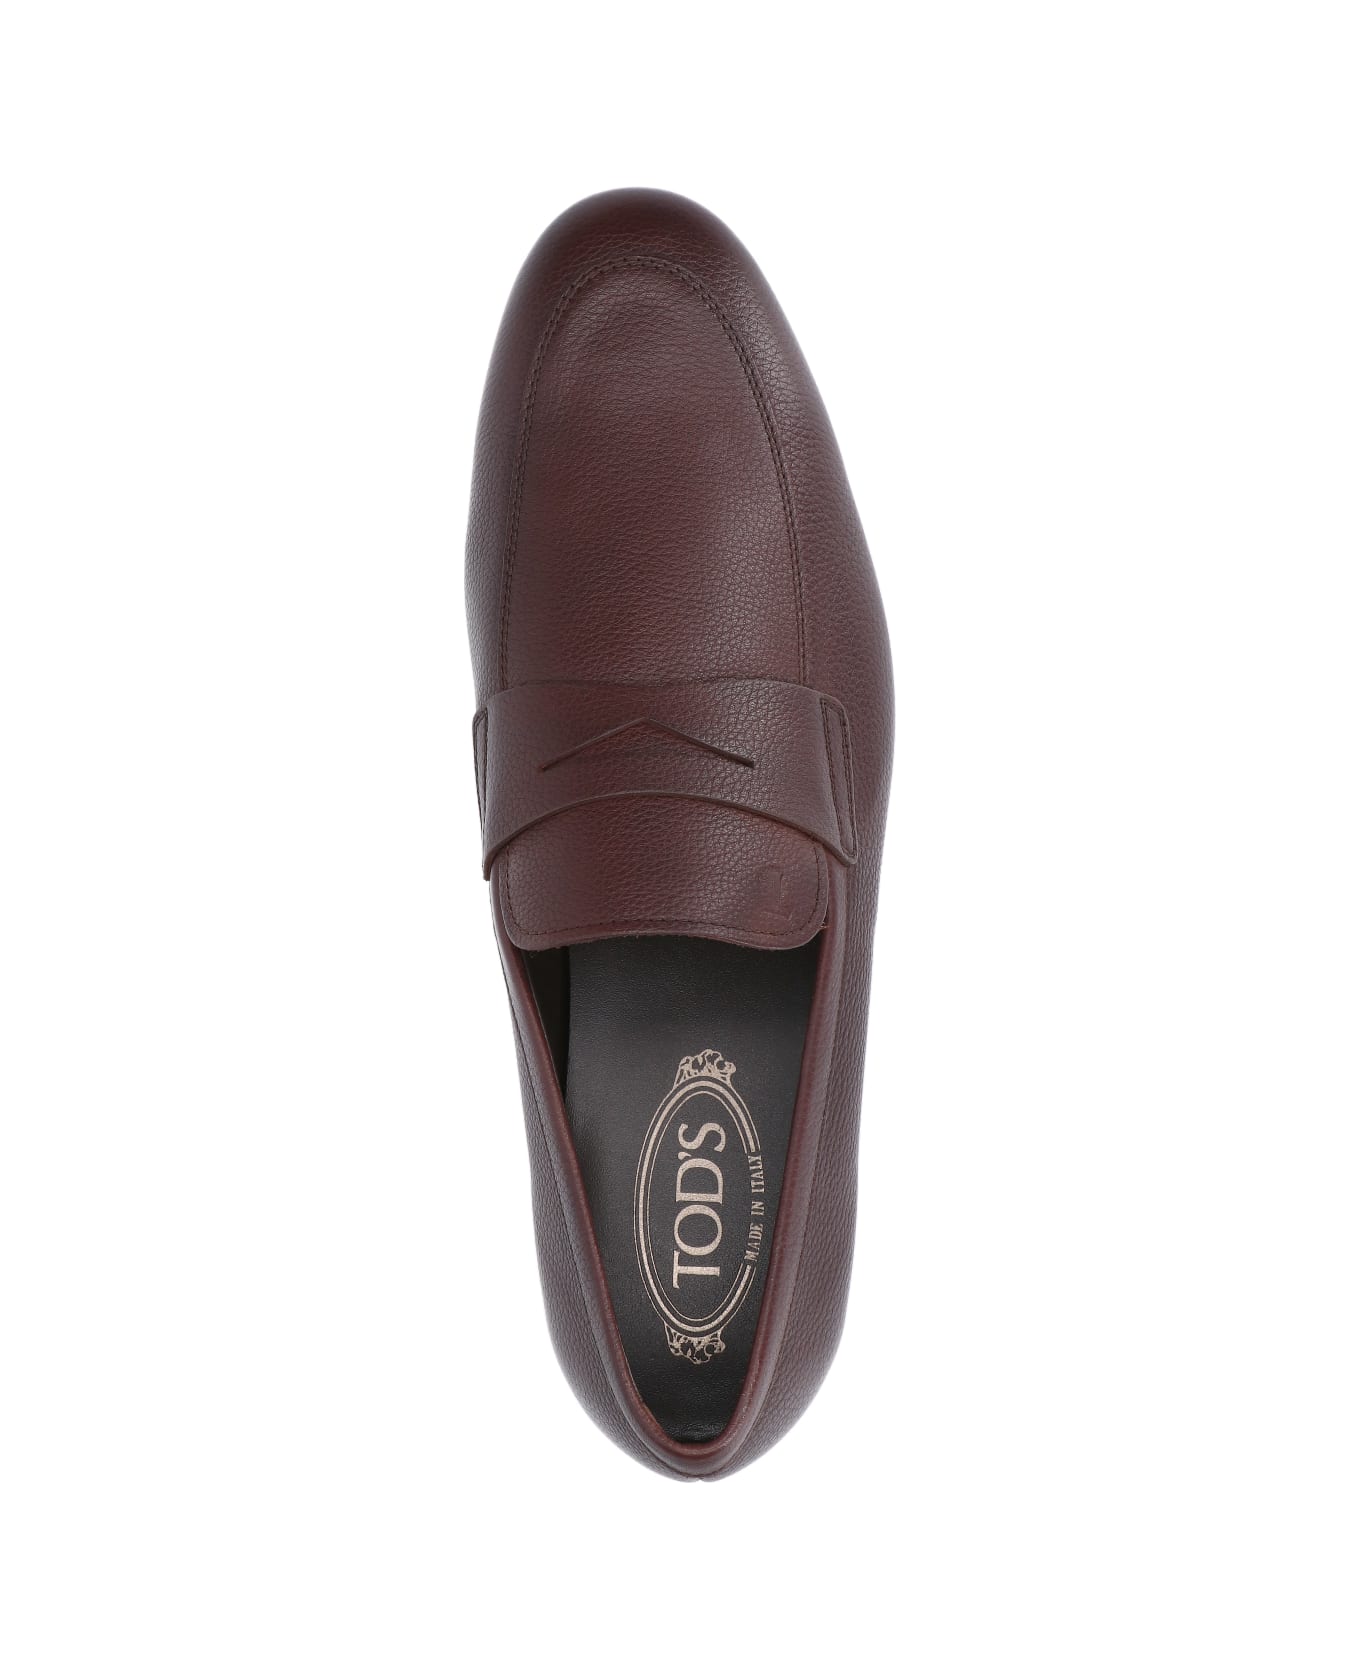 Tod's Grained Leather Loafers - Brown ローファー＆デッキシューズ